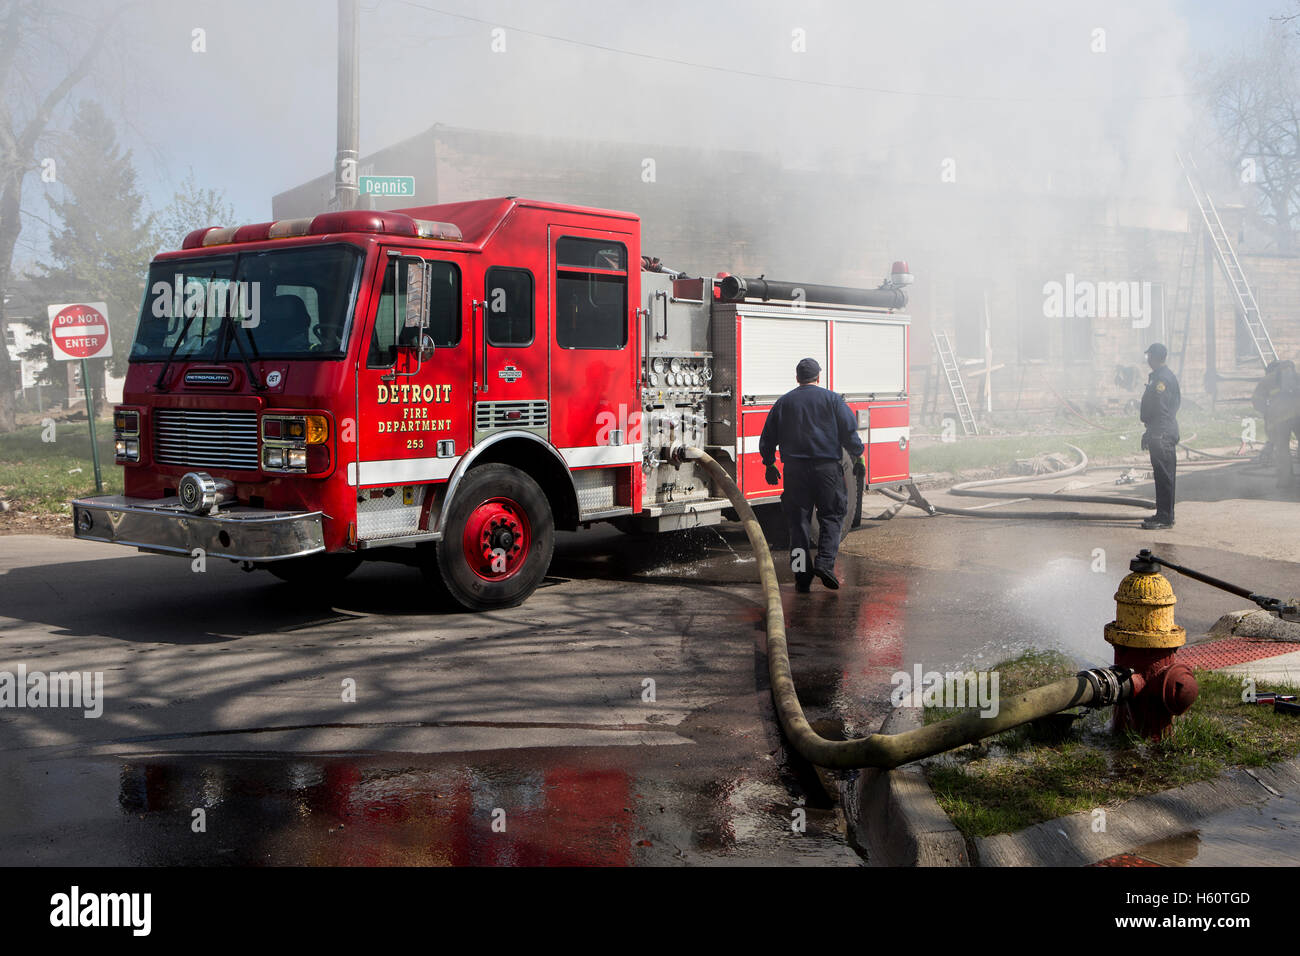 Fire engine pumper hooked to fire hydrant at house fire, Detroit, Michigan USA Stock Photo